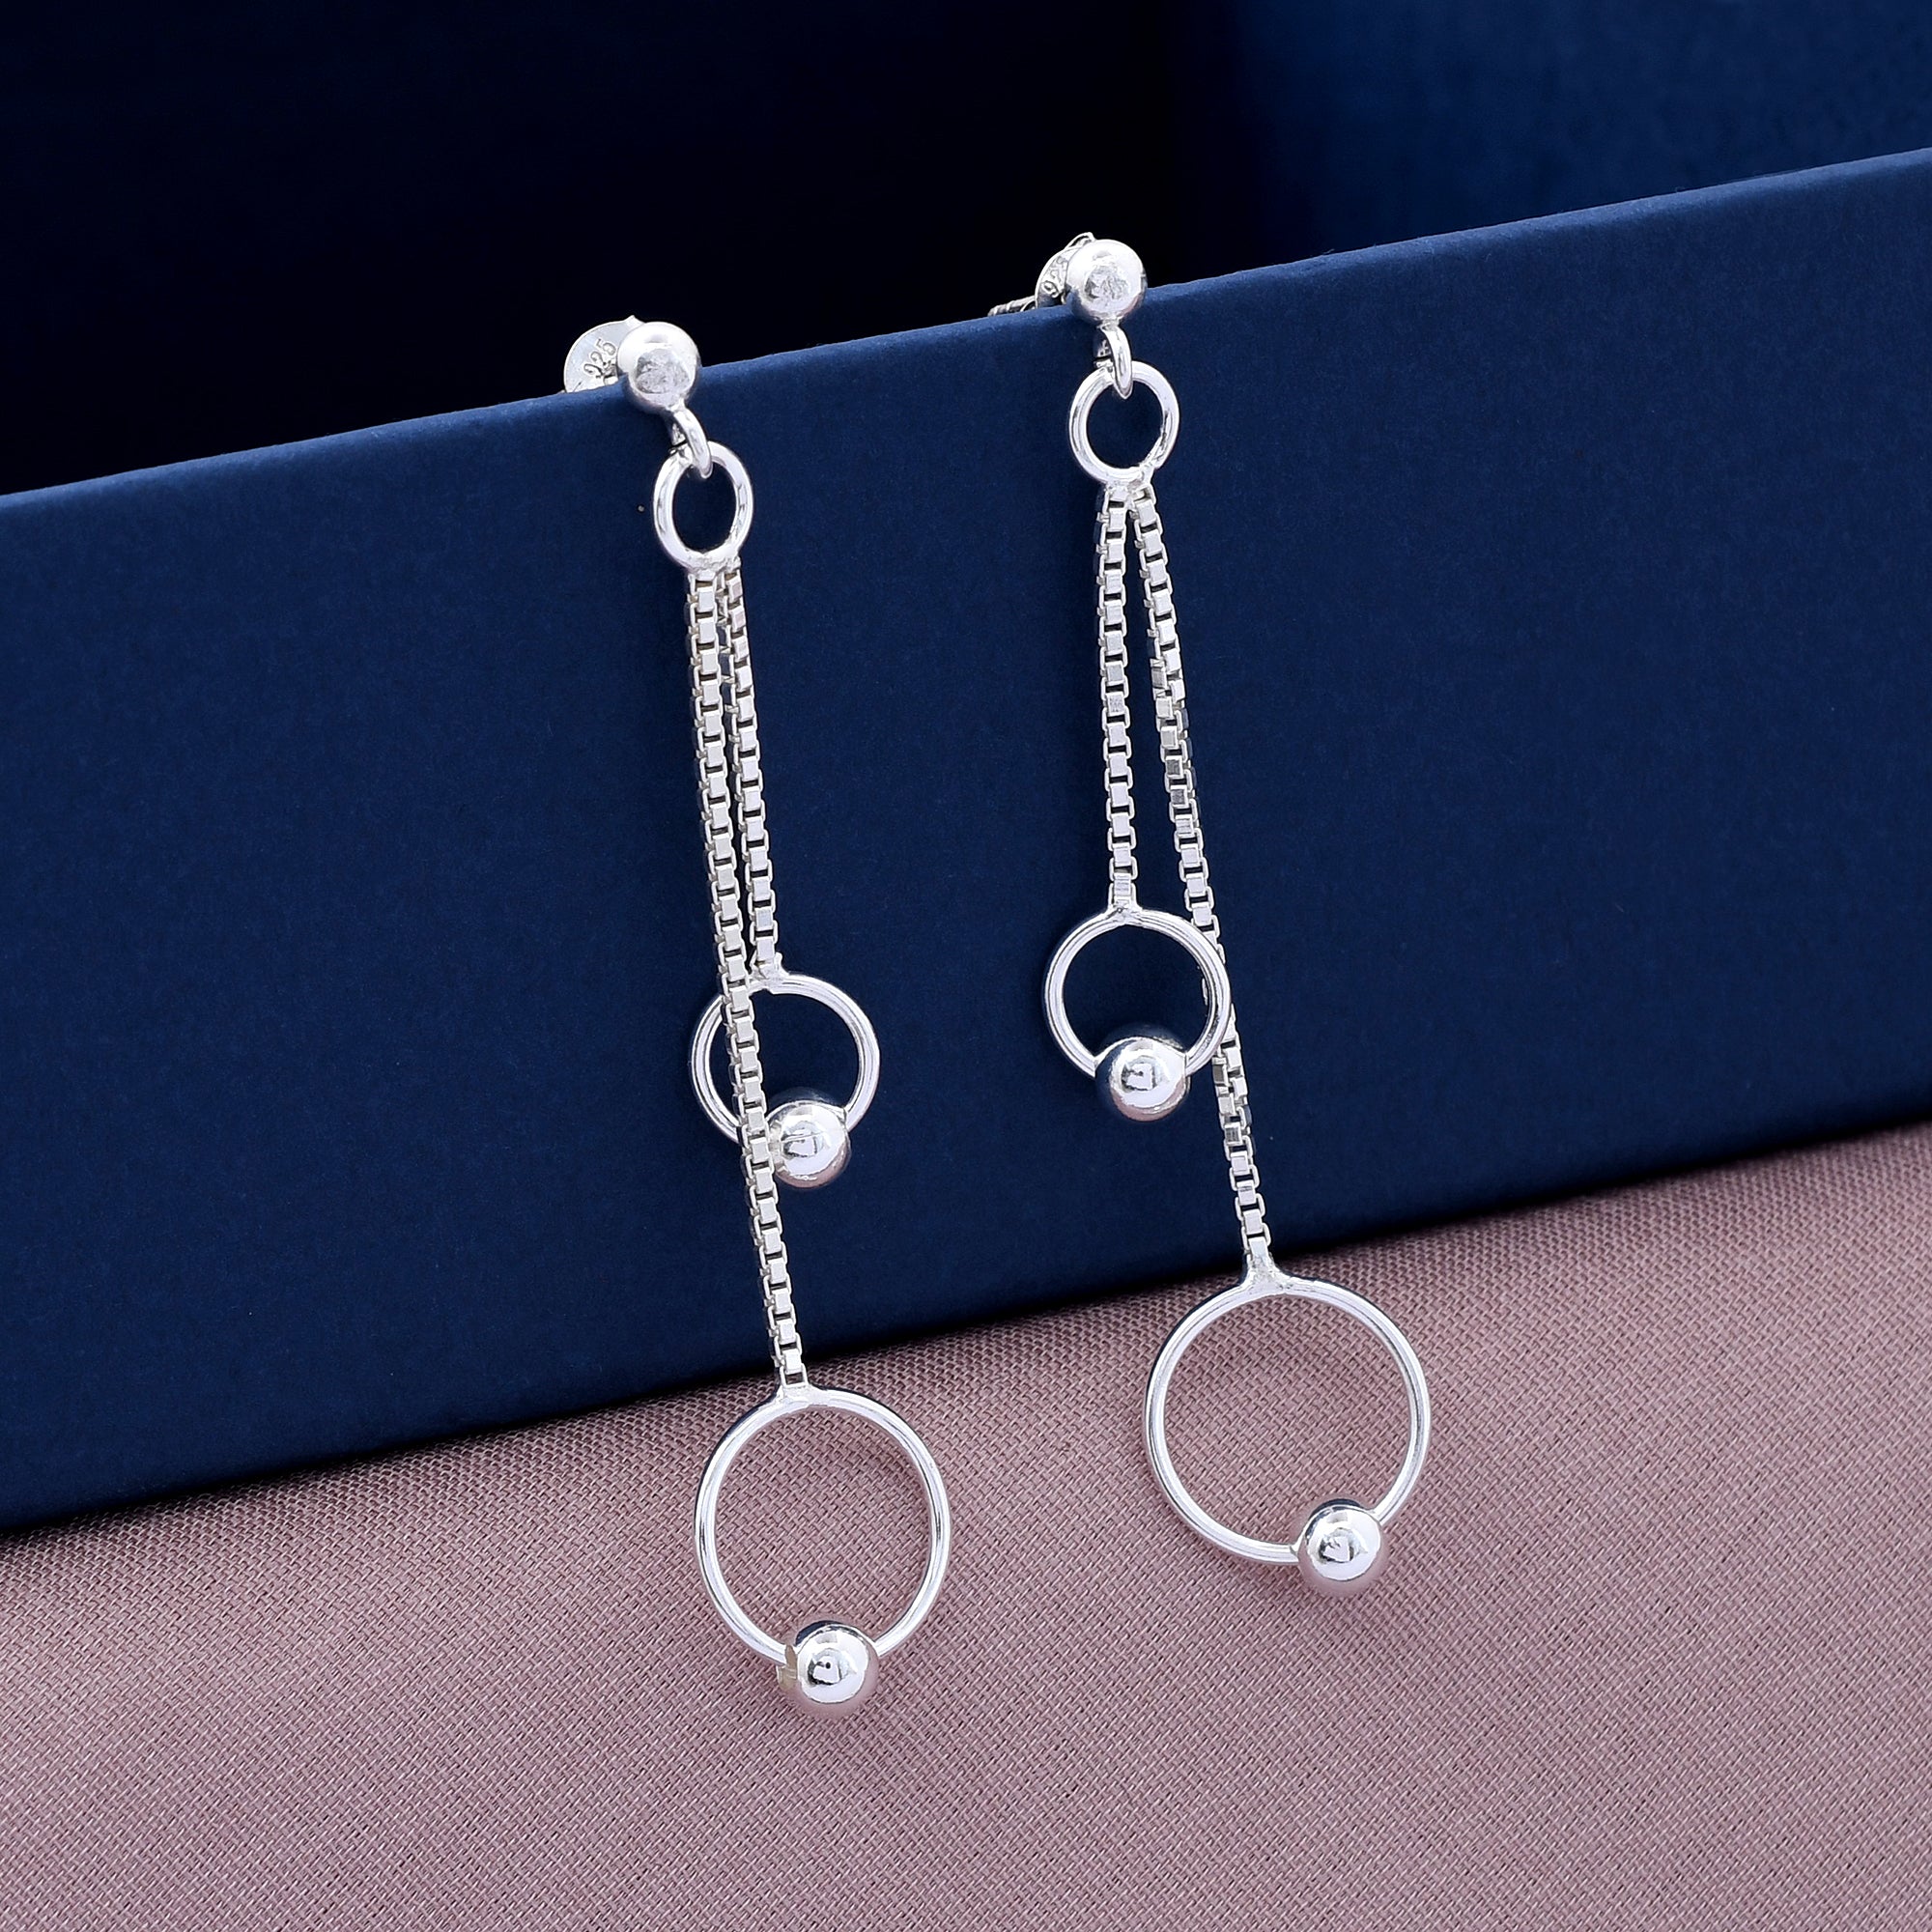 Circle Chain Design 925 Sterling Silver Earring